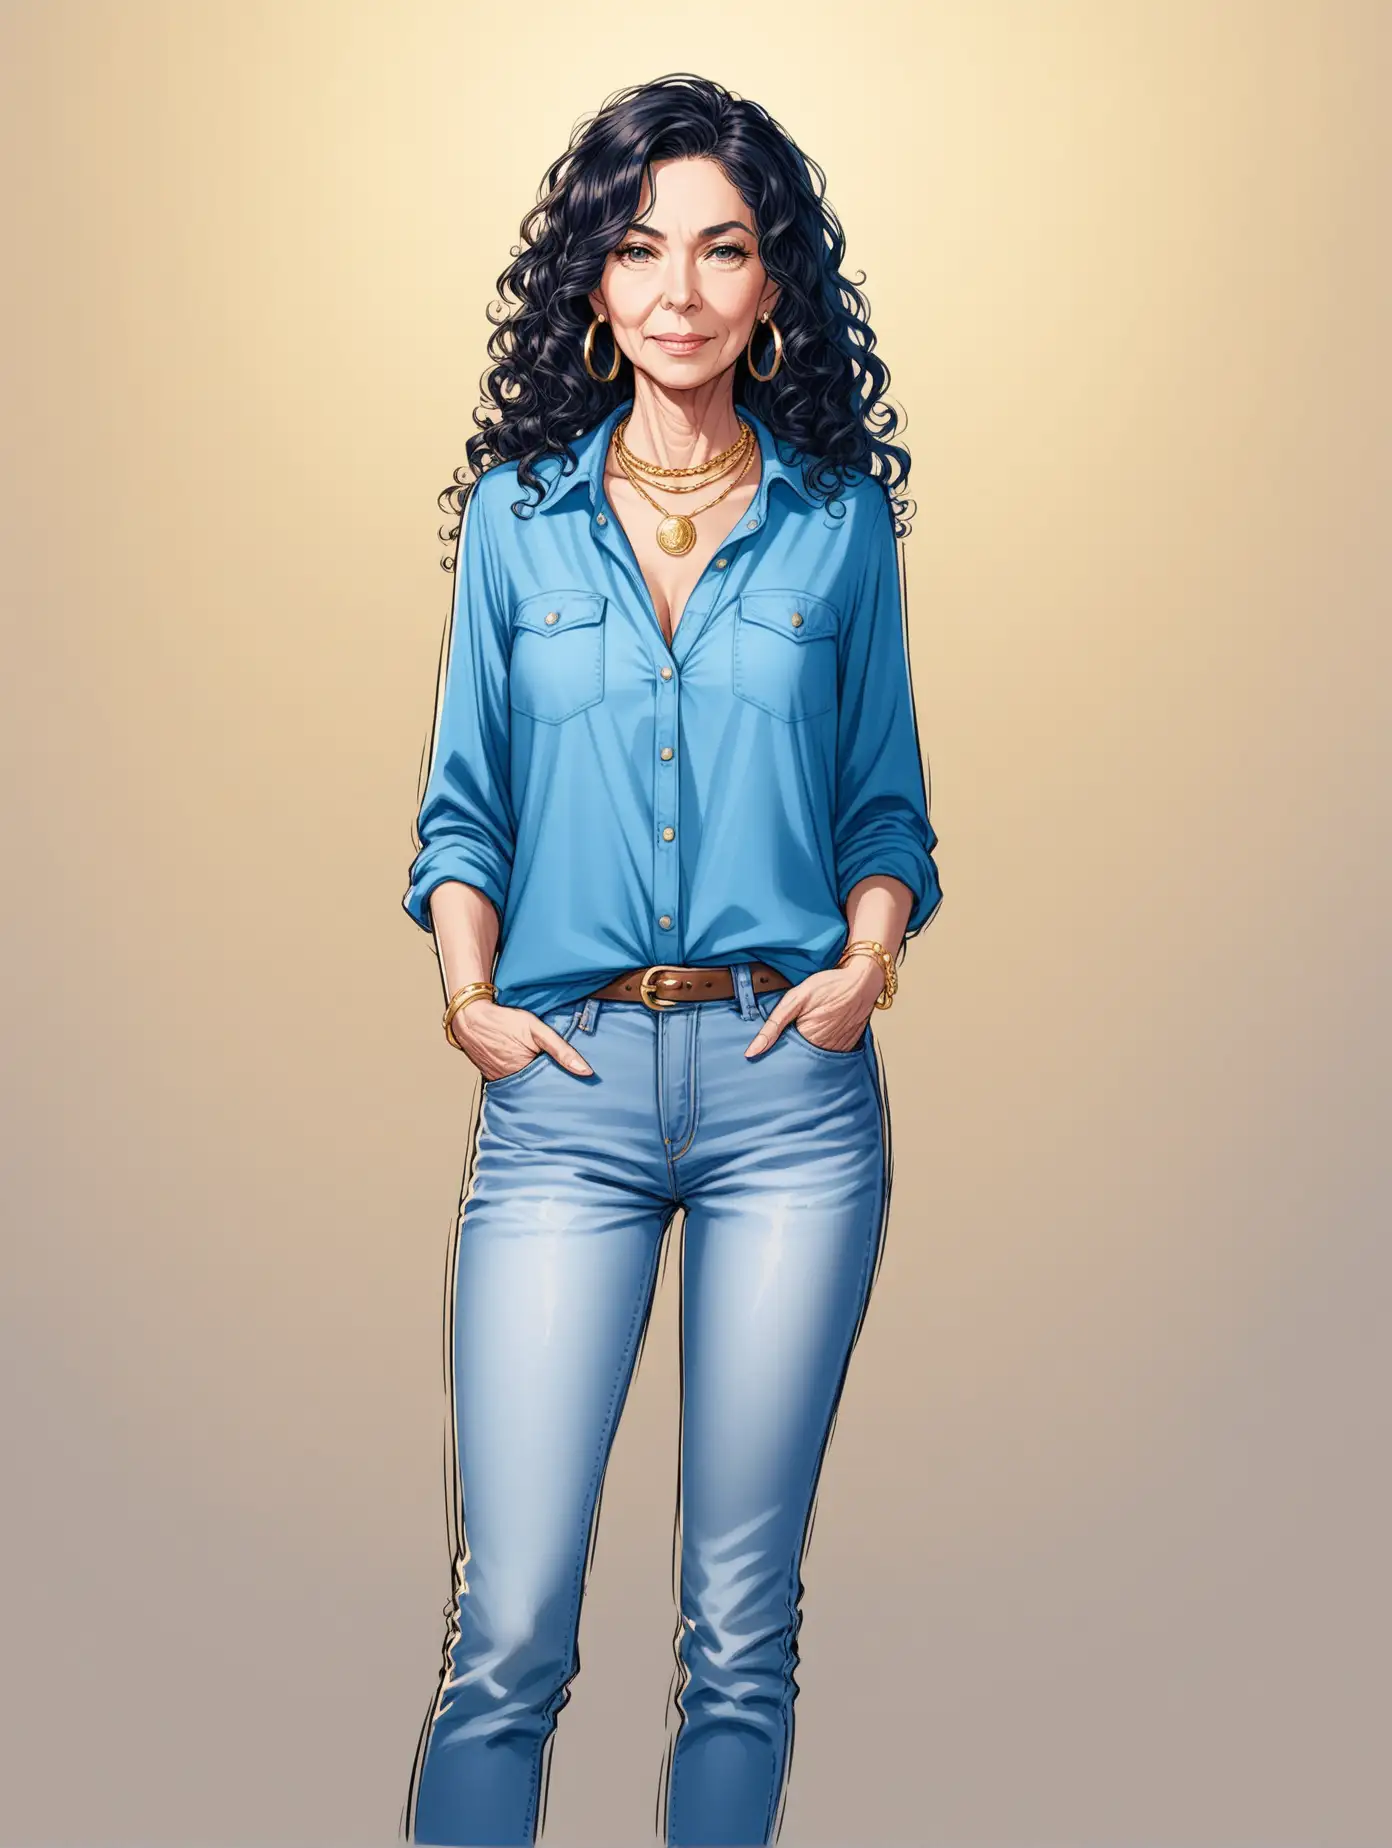 Confident-Mature-Woman-Standing-Hands-in-Pockets-with-Elegant-Gold-Jewelry